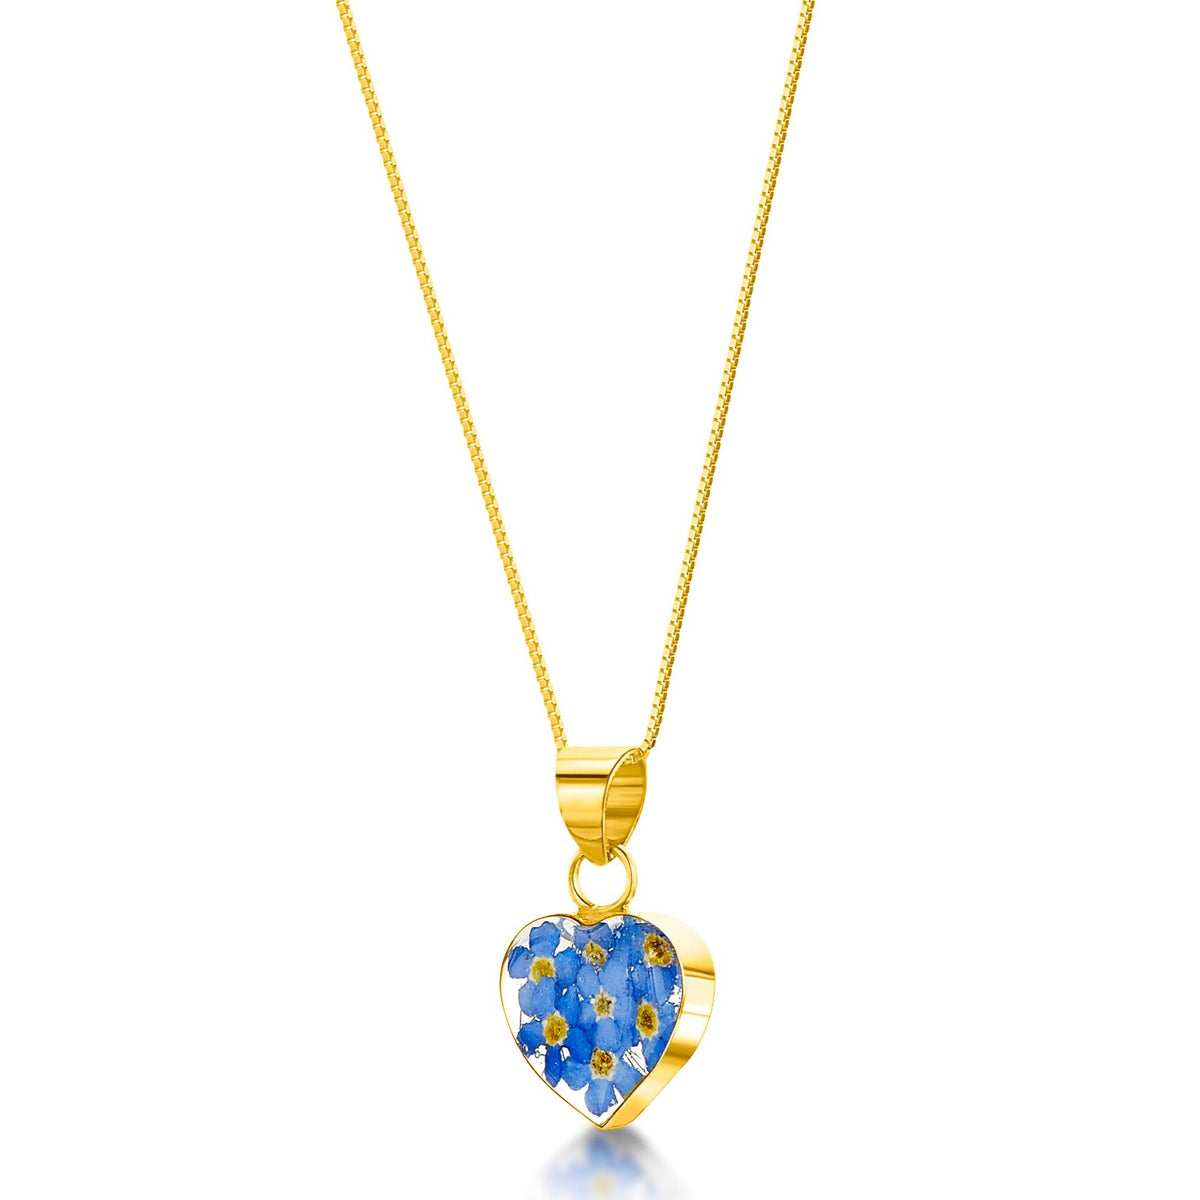 Sterling silver gold-plated heart pendant with real forget-me-not flowers set in resin. Hangs on an 18 inch adjustable sterling silver gold-plated chain.